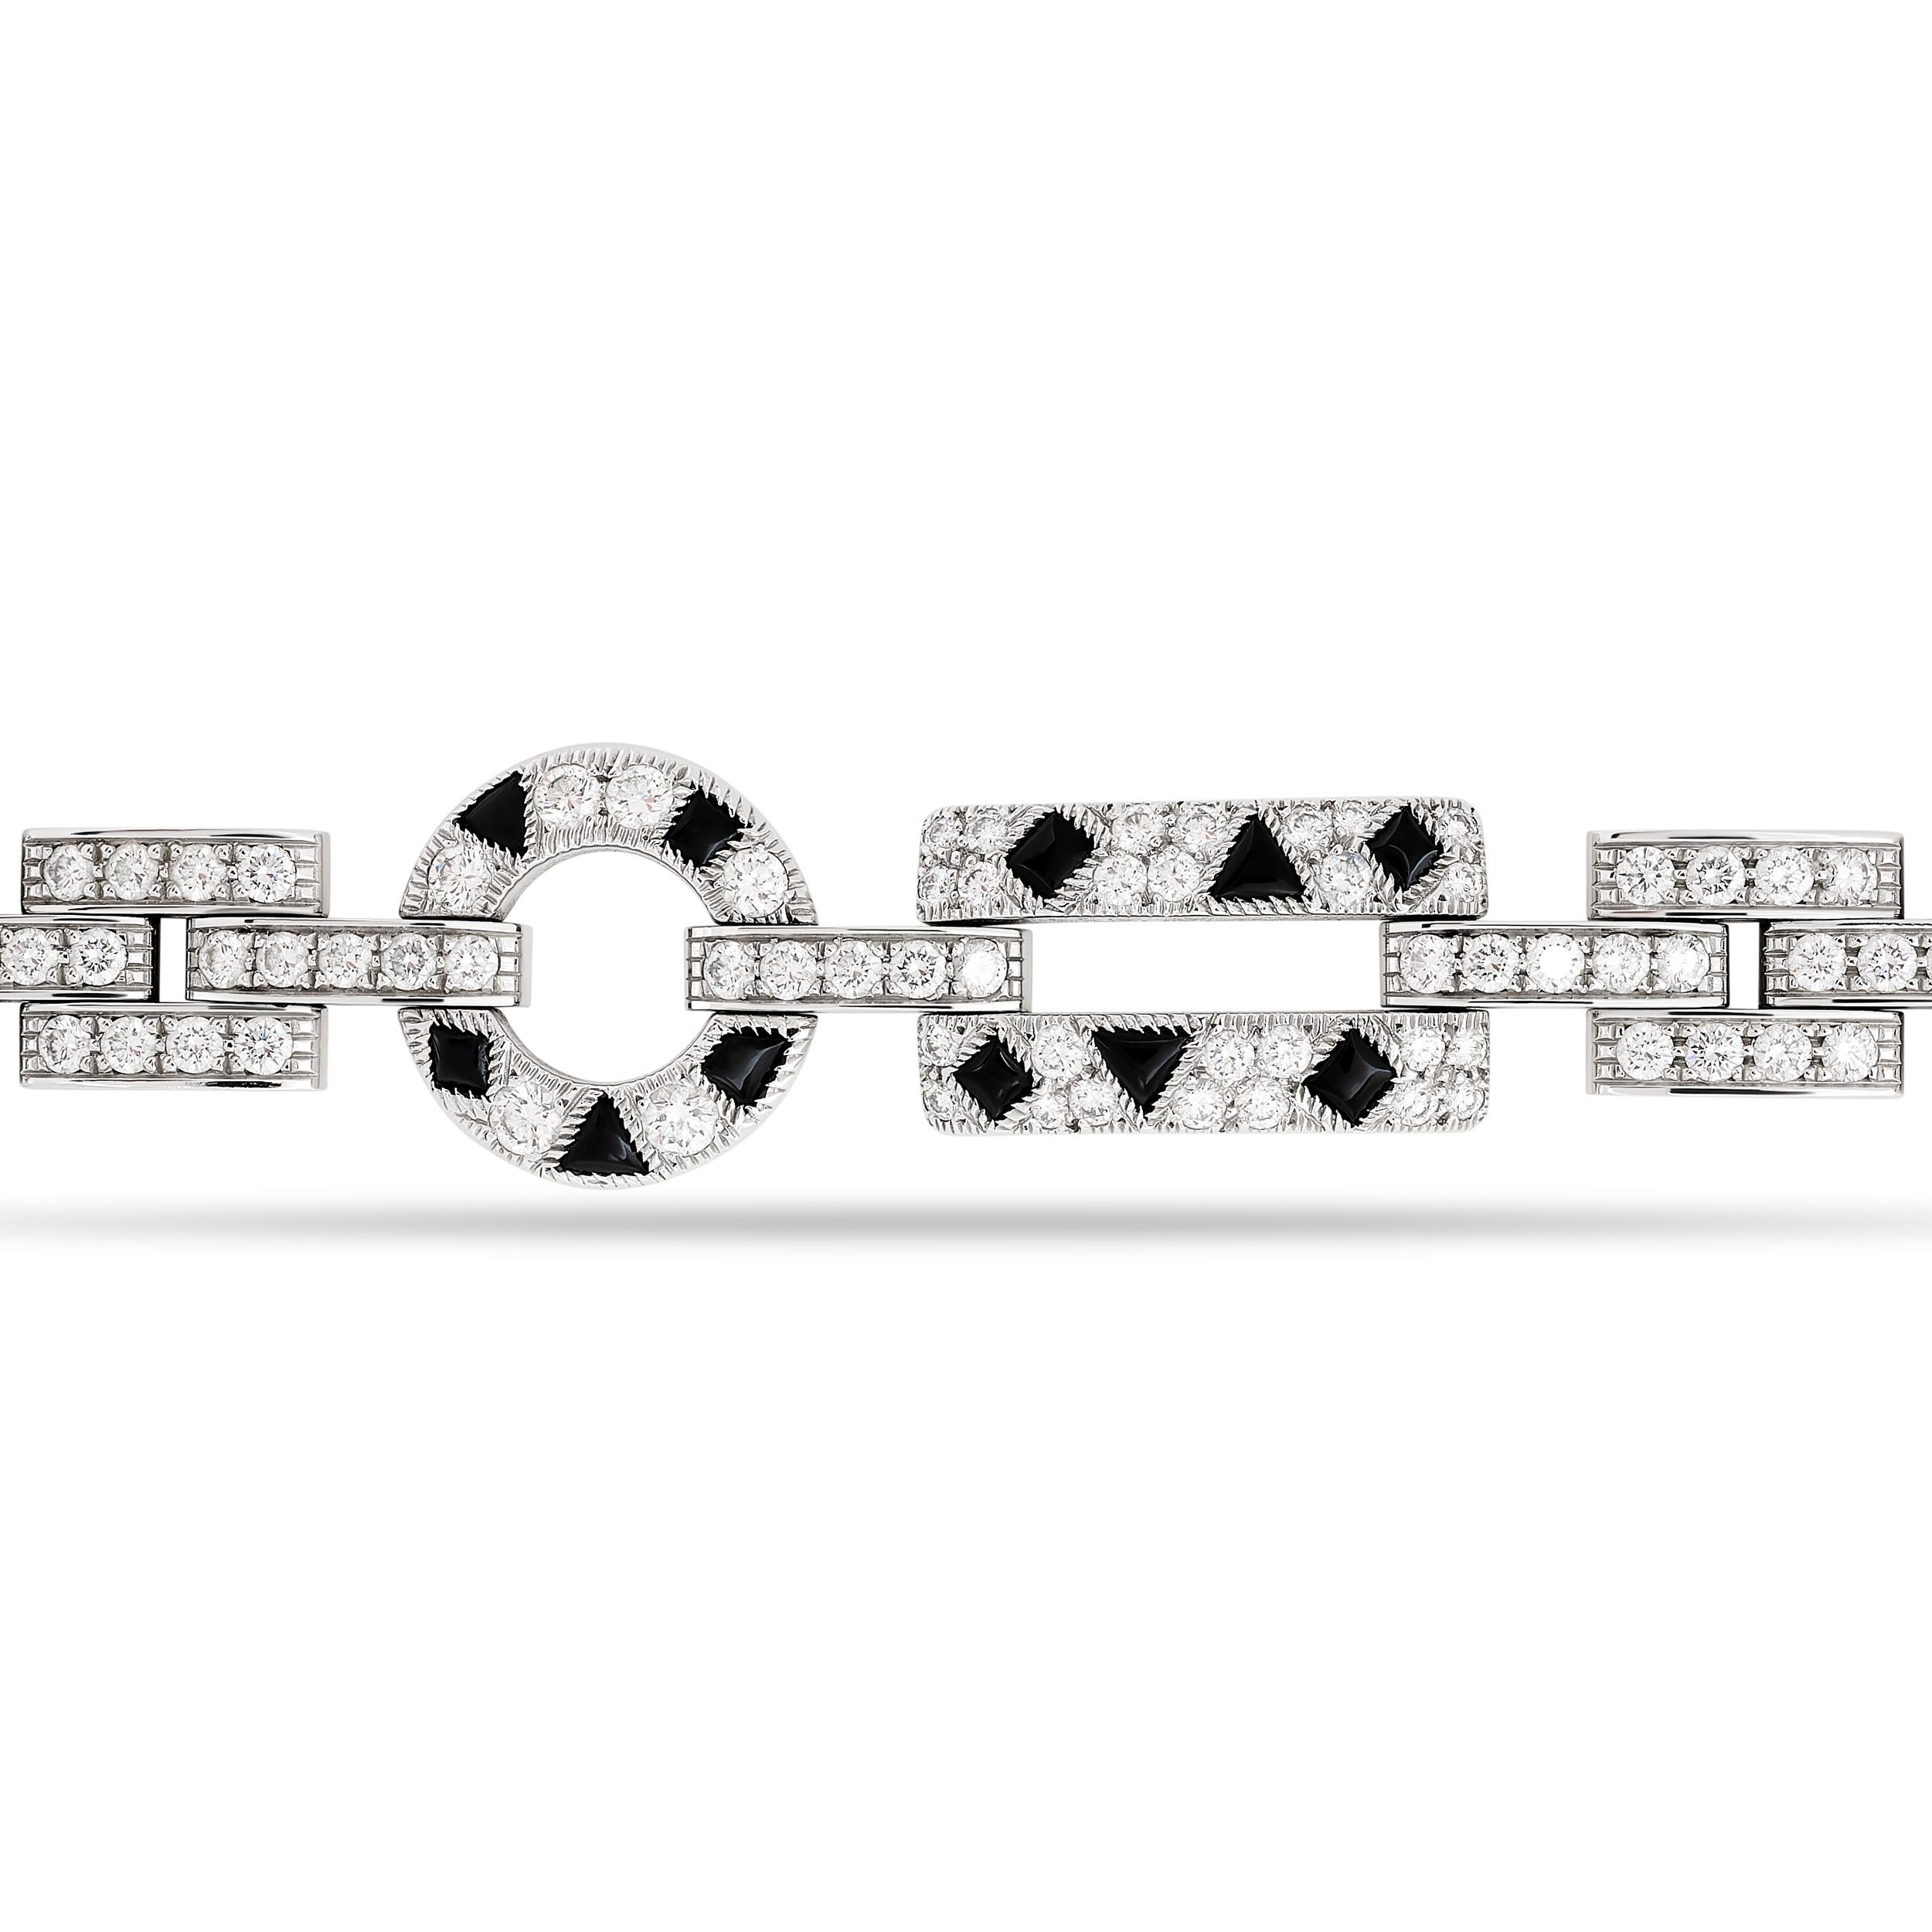 Cartier Panther de Cartier 18 Karat White Gold Diamond and Onyx Bracelet In Excellent Condition For Sale In Philadelphia, PA